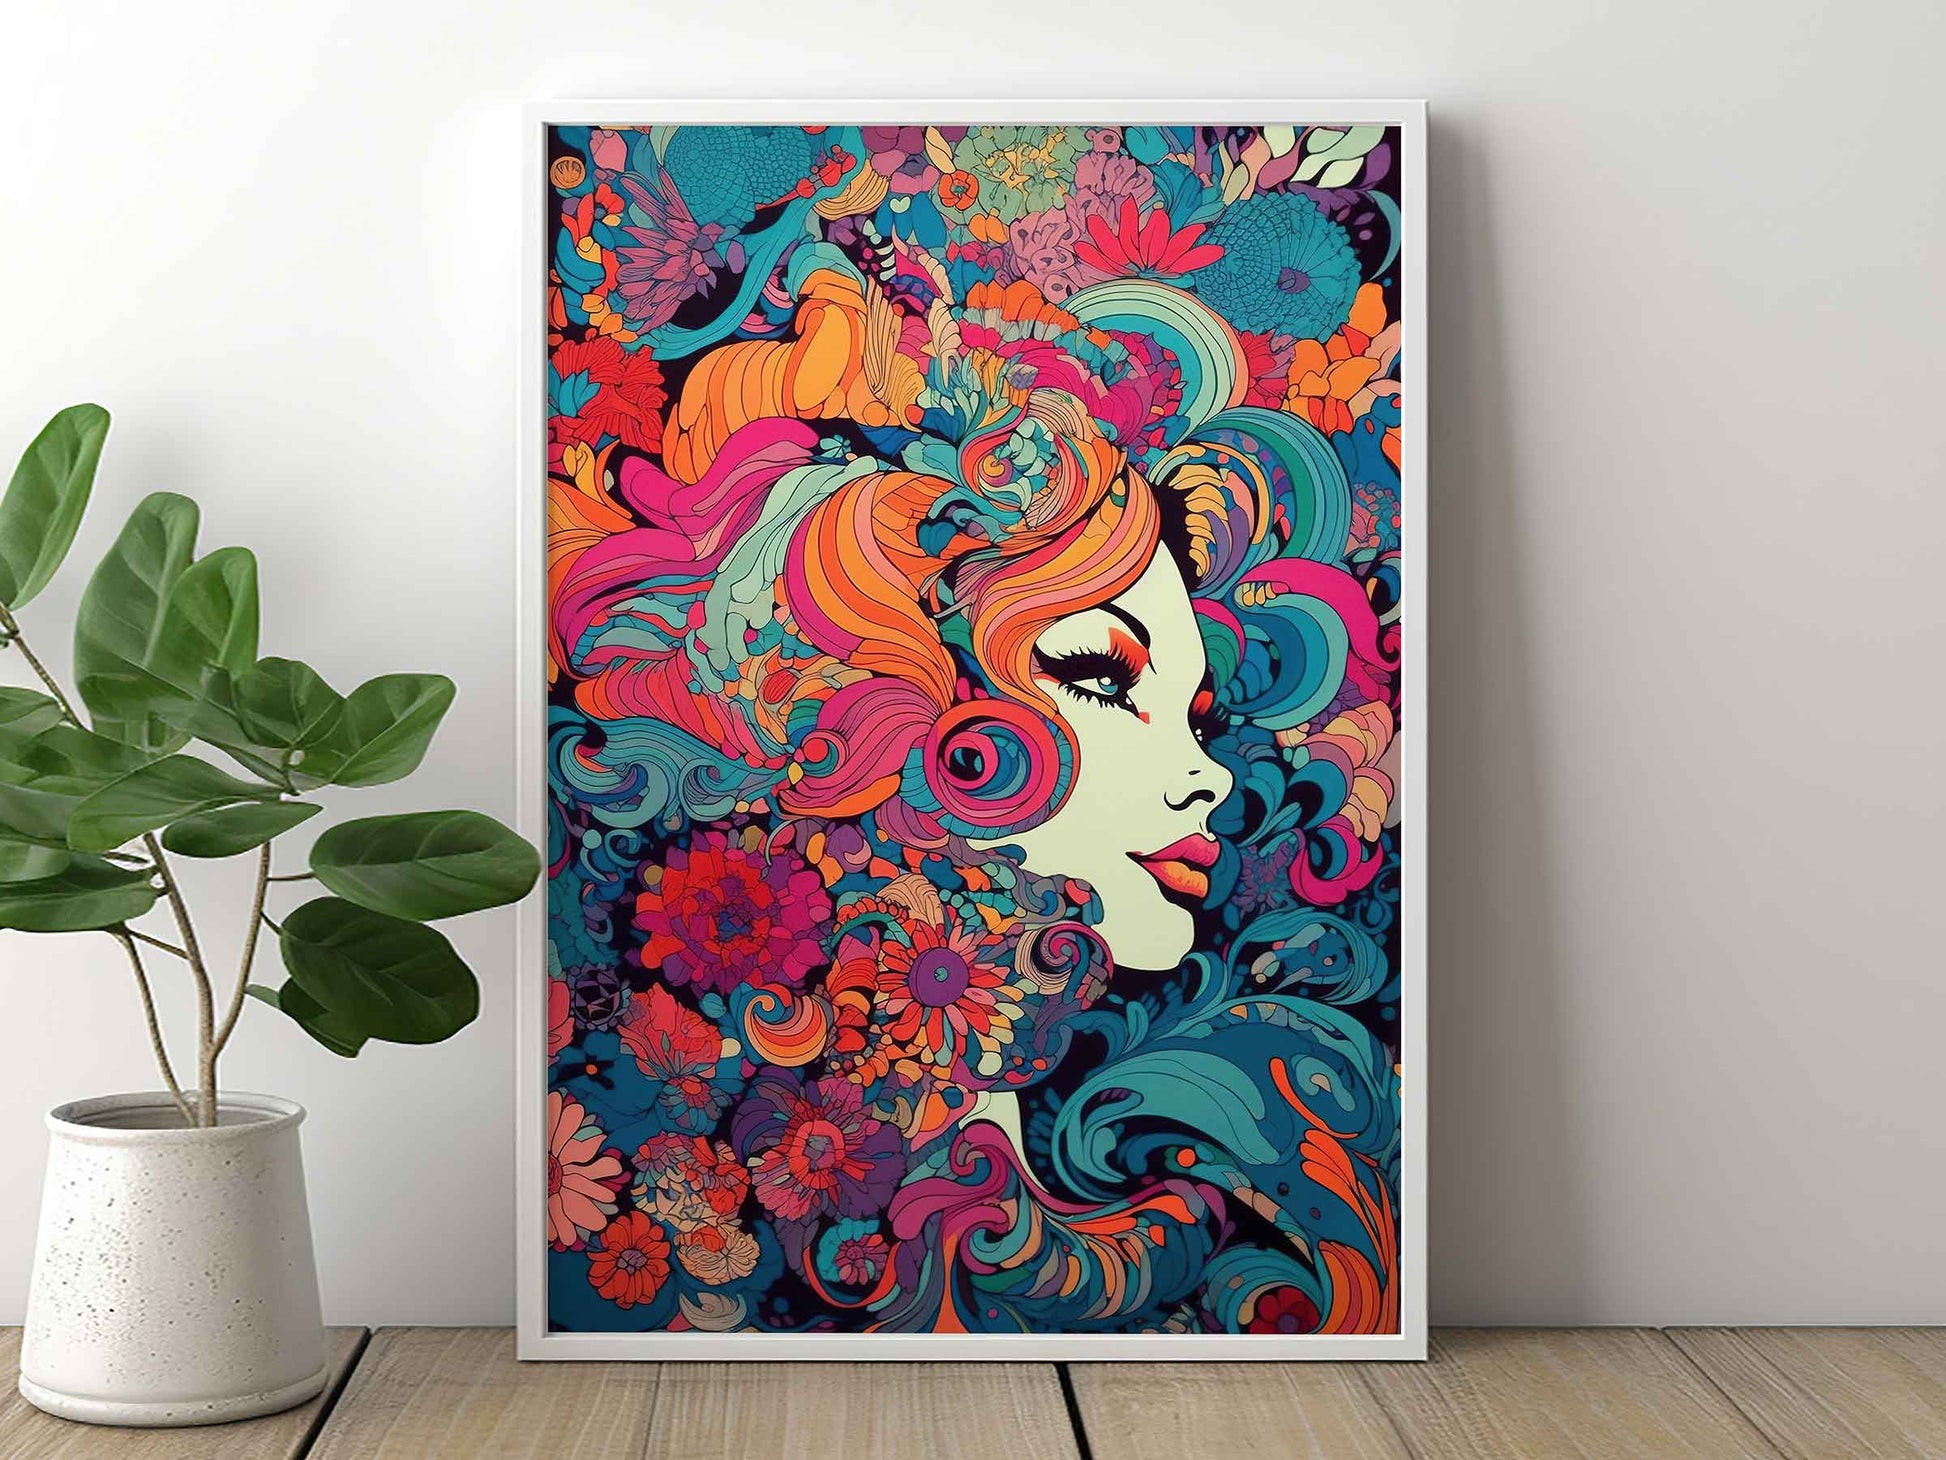 Framed Image of Art Nouveau Vintage Parisian 70s Psychedelic Wall Art Poster Print